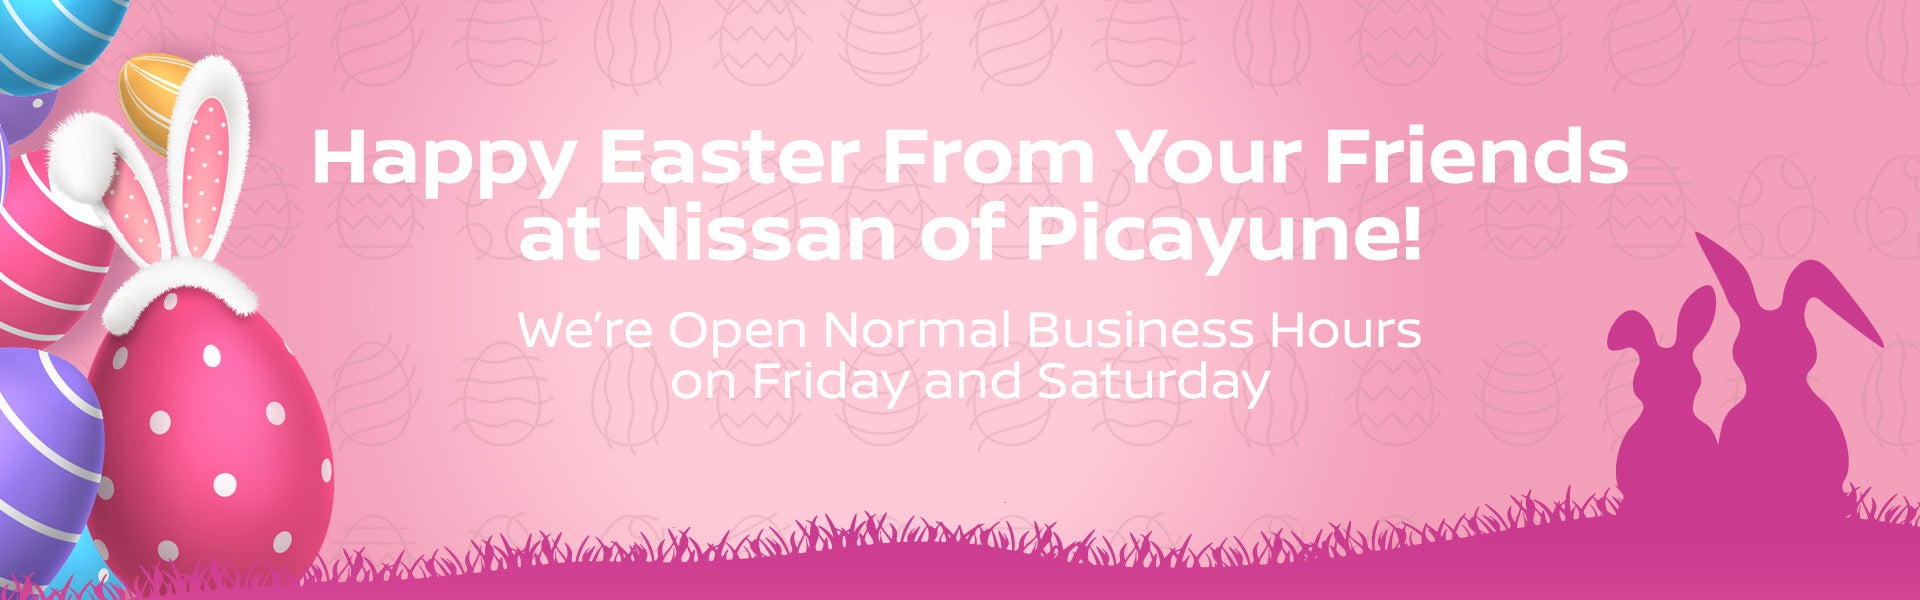 Happy Easter From Your Friends at Nissan of Picayune 